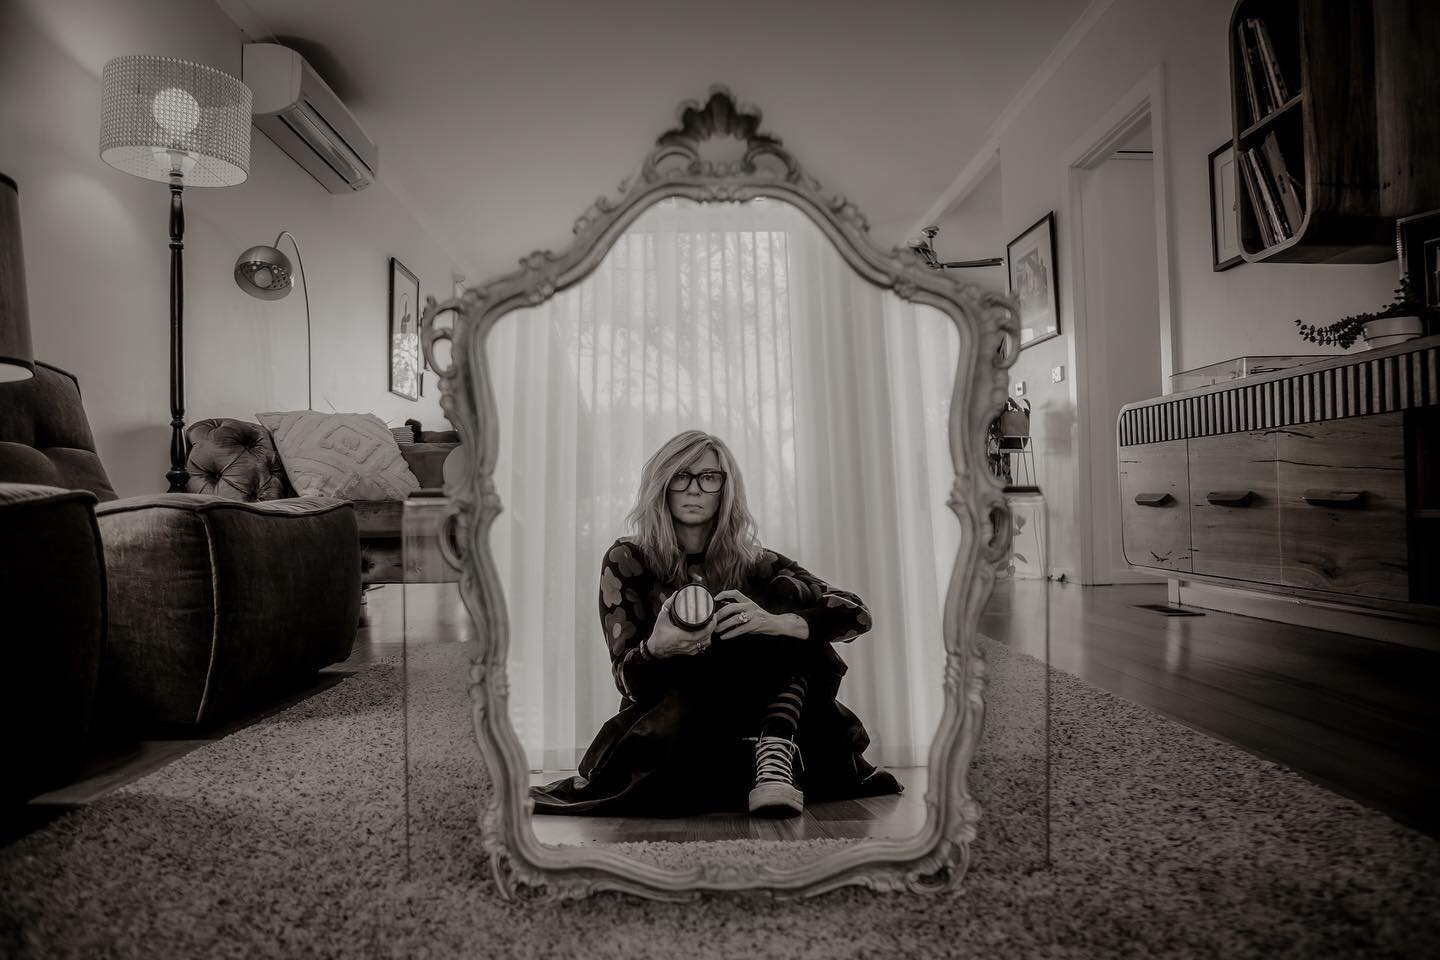 Me just playing with one of the many gold mirrors I have floating around!  Must have a thing for them 😉 #photographer #bandw #naturallightphotography #blackandwhite #selfie #athome #mellow #woman